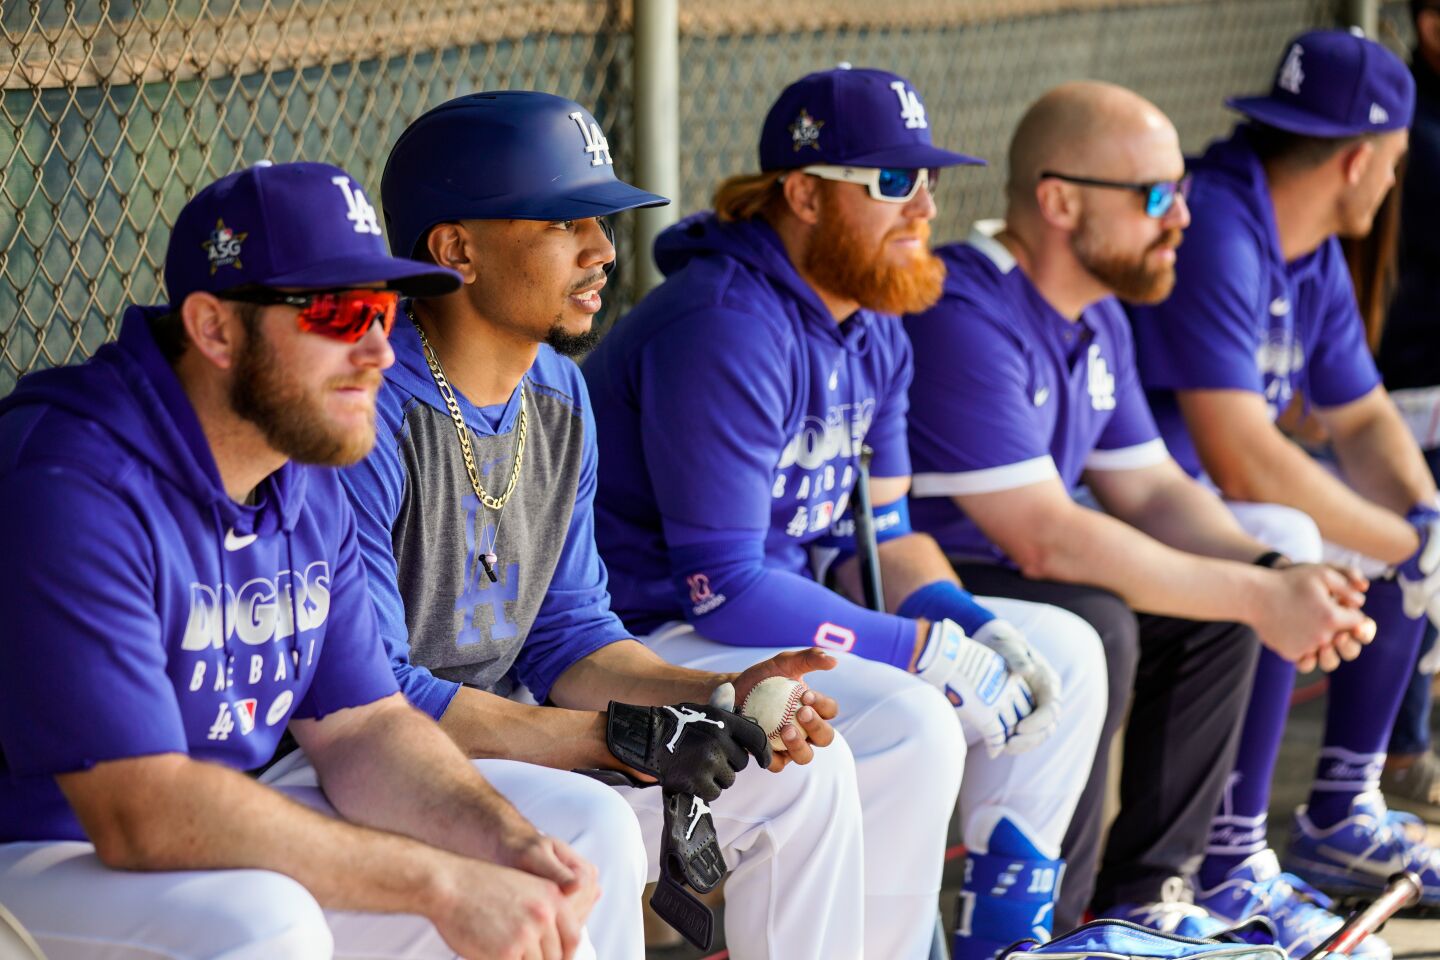 Dodgers players, including from left, Max Muncy, Mookie Betts and Justin Turner, sit in a dugout during a practice at Camelback Ranch.